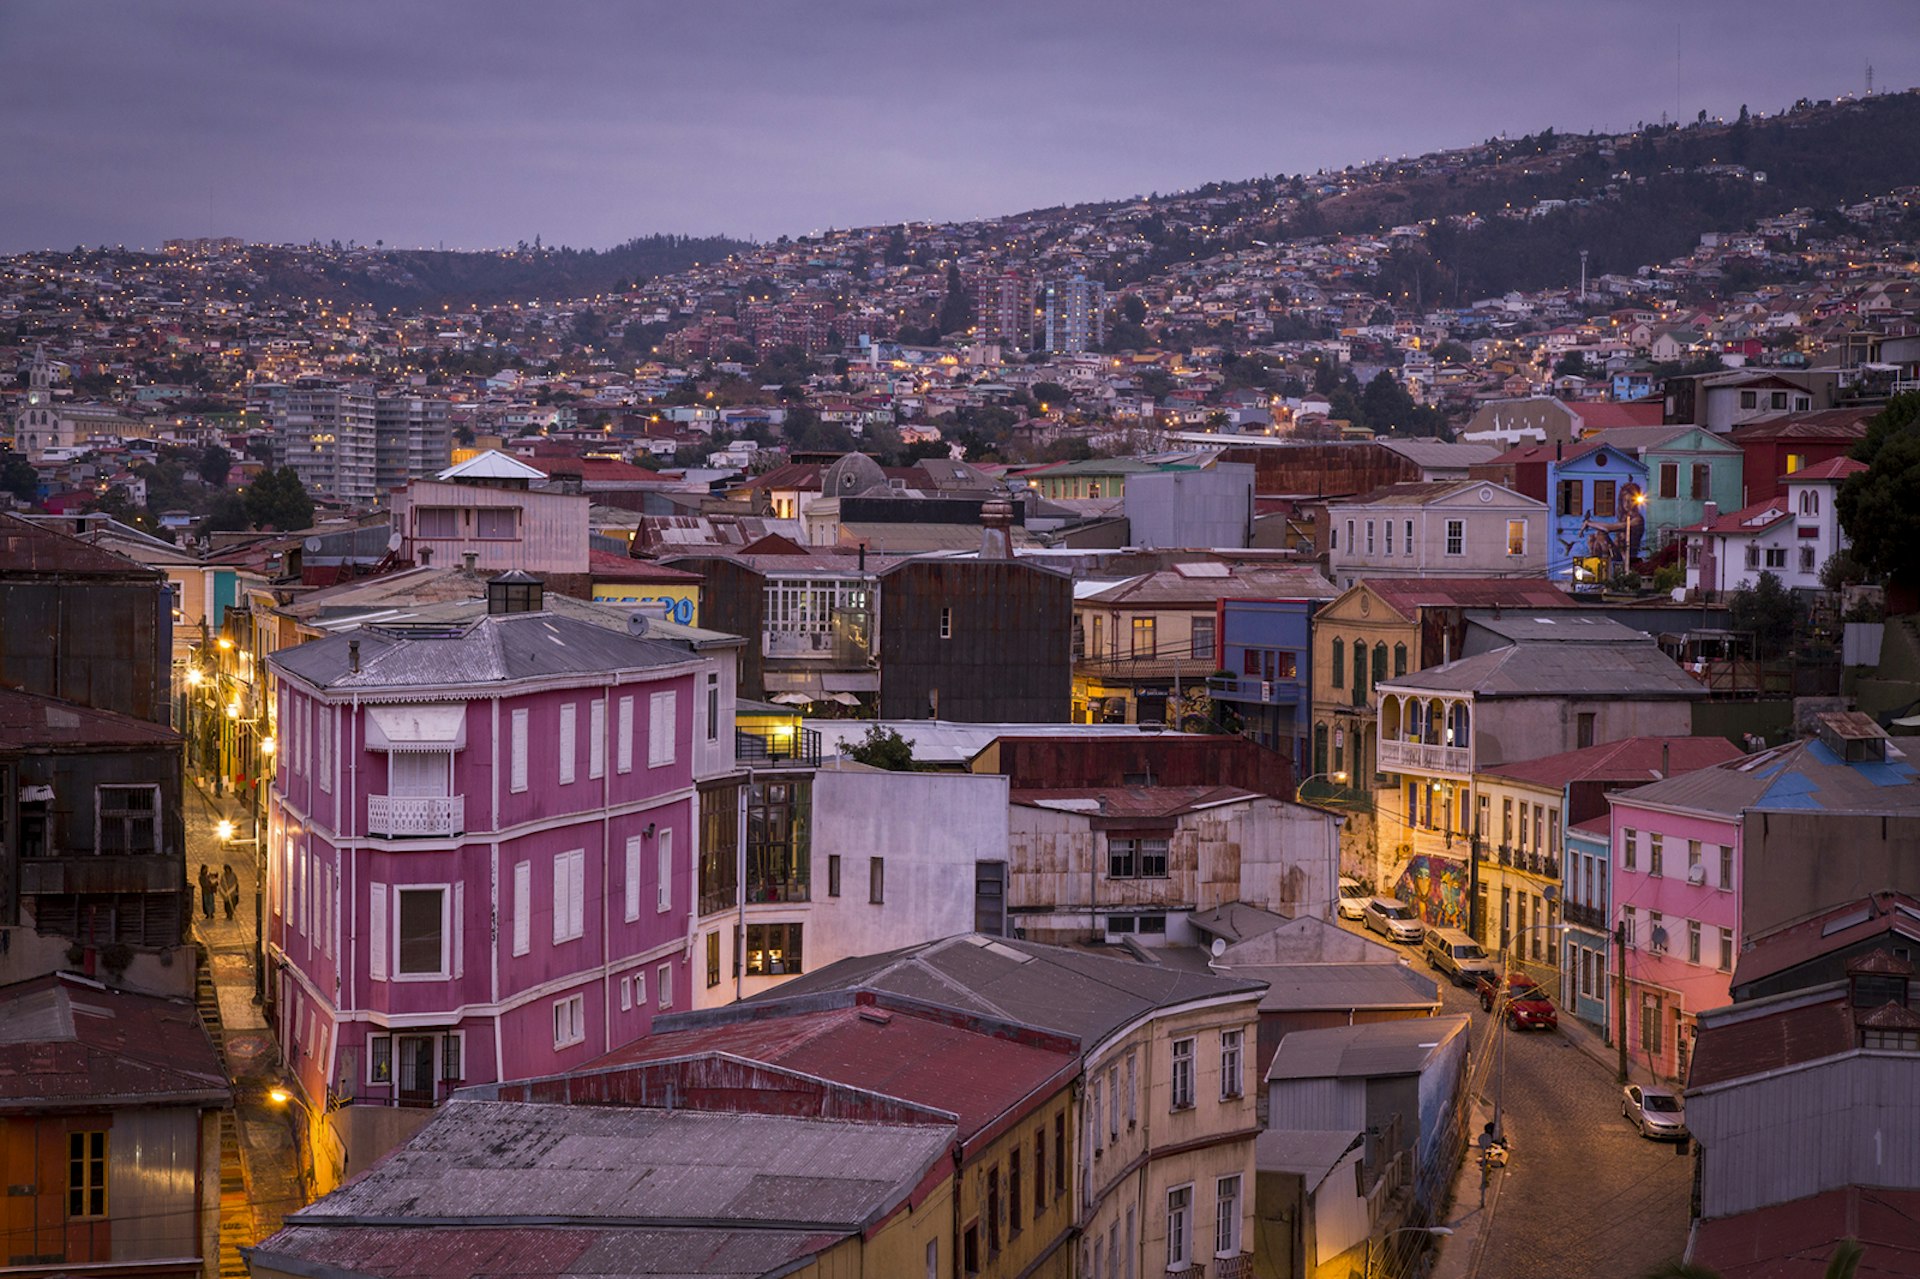 A view over the rooftops of Valparaiso’s Cerro Alegre neighborhood, Chile © Philip Lee Harvey / Lonely Planet